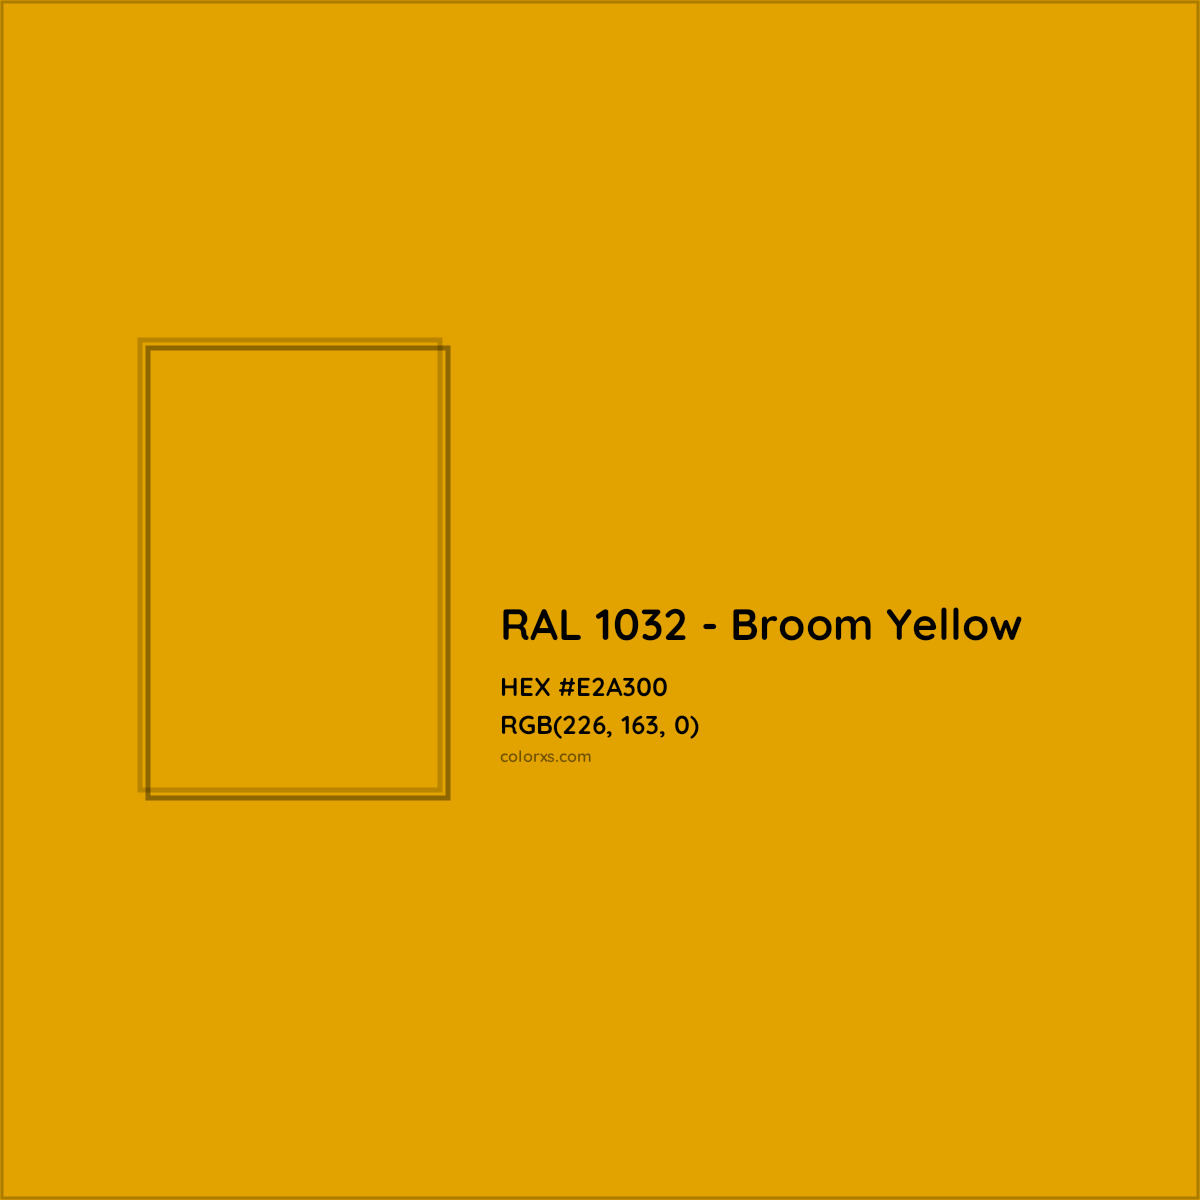 HEX #E2A300 RAL 1032 - Broom Yellow CMS RAL Classic - Color Code